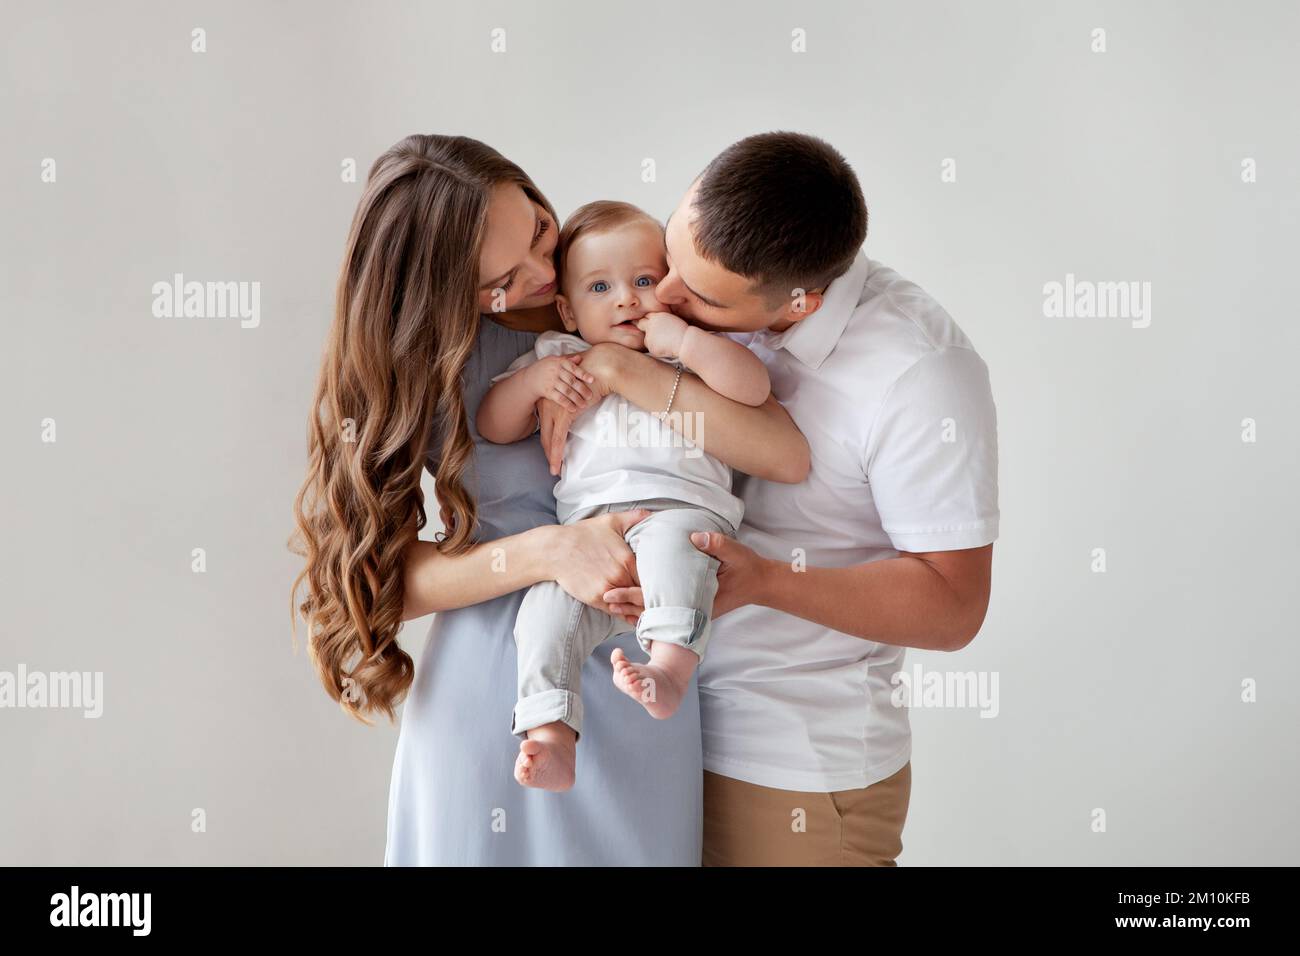 Happy young family. Beautiful Mother and father kissing their baby . Parents, Portrait of Mom, dad and smiling child on hands isolated over white back Stock Photo